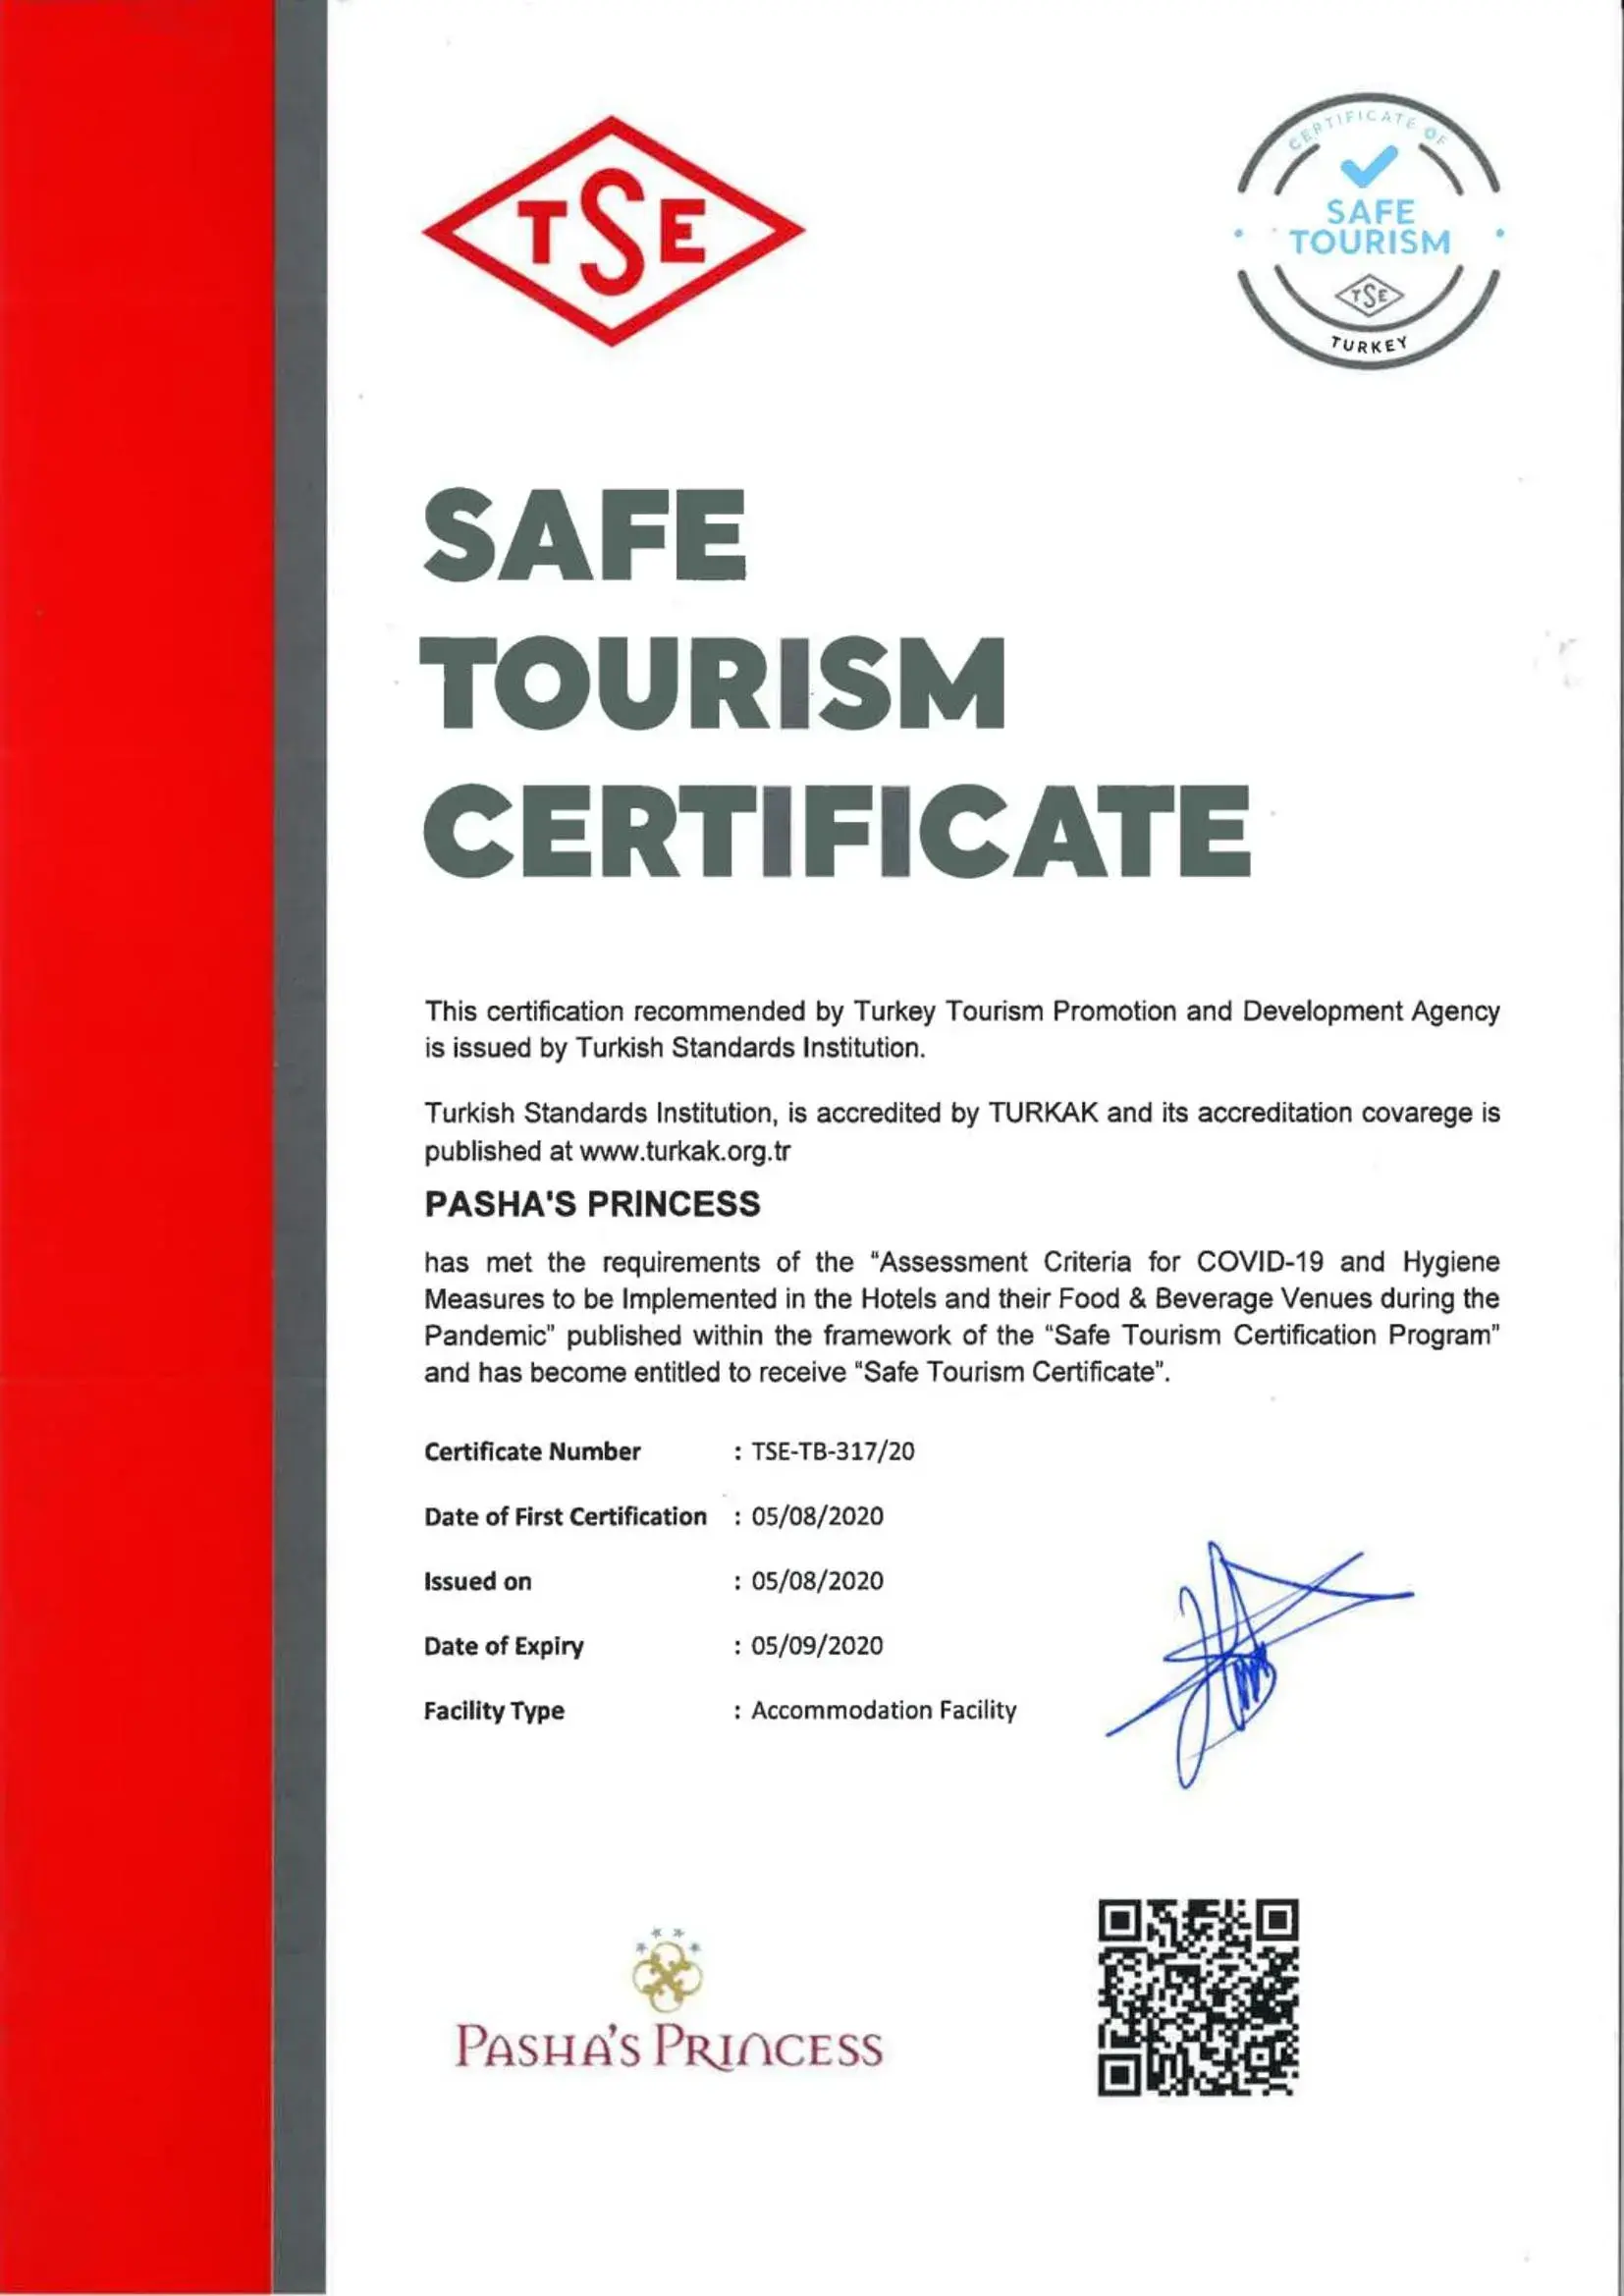 Certificate/Award in Pashas Princess by Werde Hotels - Adult Only